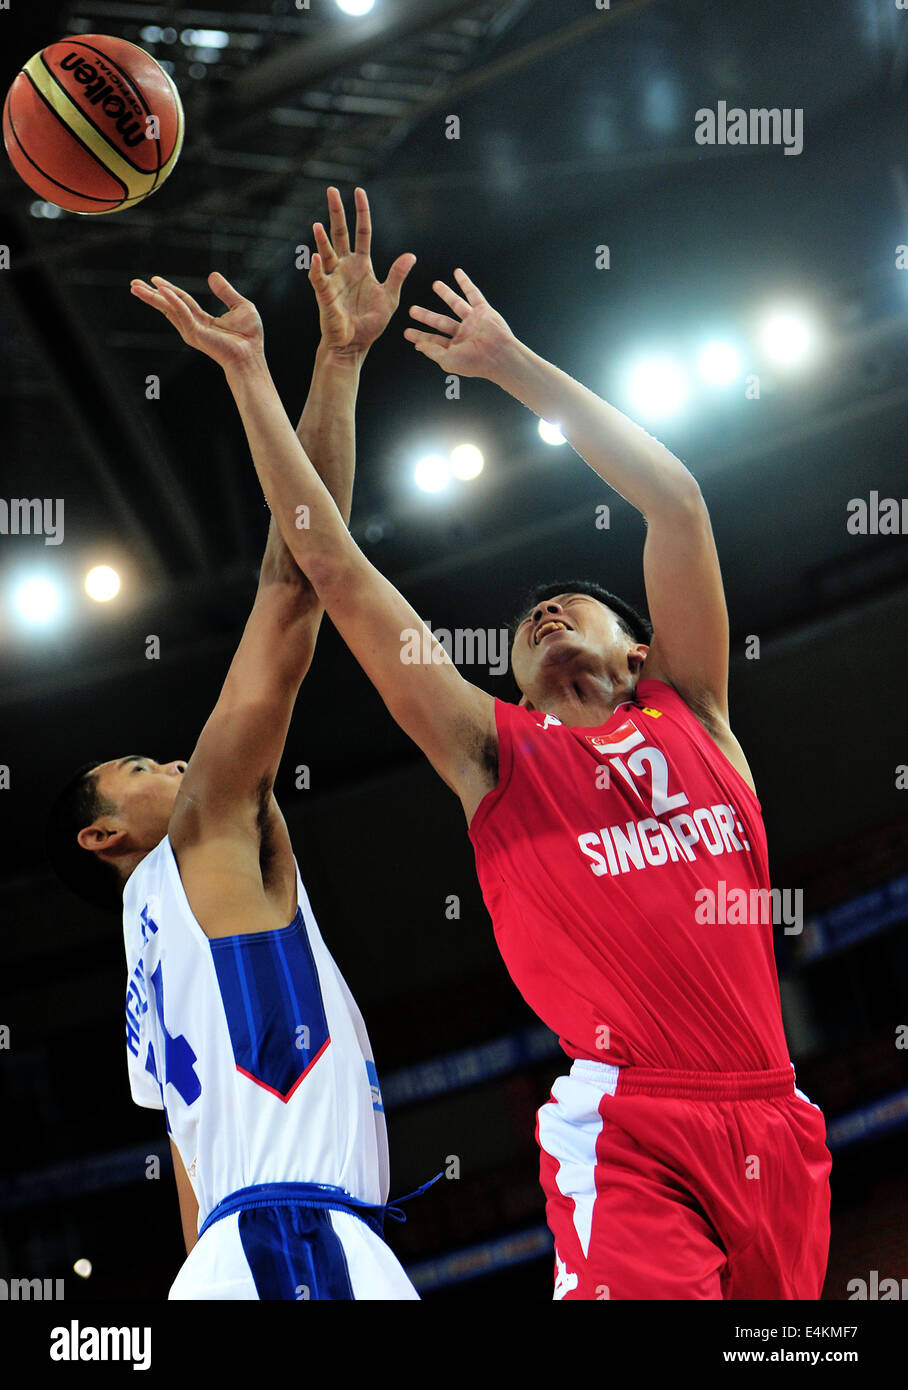 (140714) -- WUHAN, July 14, 2014 (Xinhua) -- Japeth Paul Aguilar (L) of Philippines fights for a rebound during the match between Singapore and Philippines in the 5th FIBA Asia Cup basketball tournament in Wuhan, central China's Hubei Province on July 14, 2014. The Philippines beat Singapore 74-57.(Xinhua/Xiao Yijiu) Stock Photo